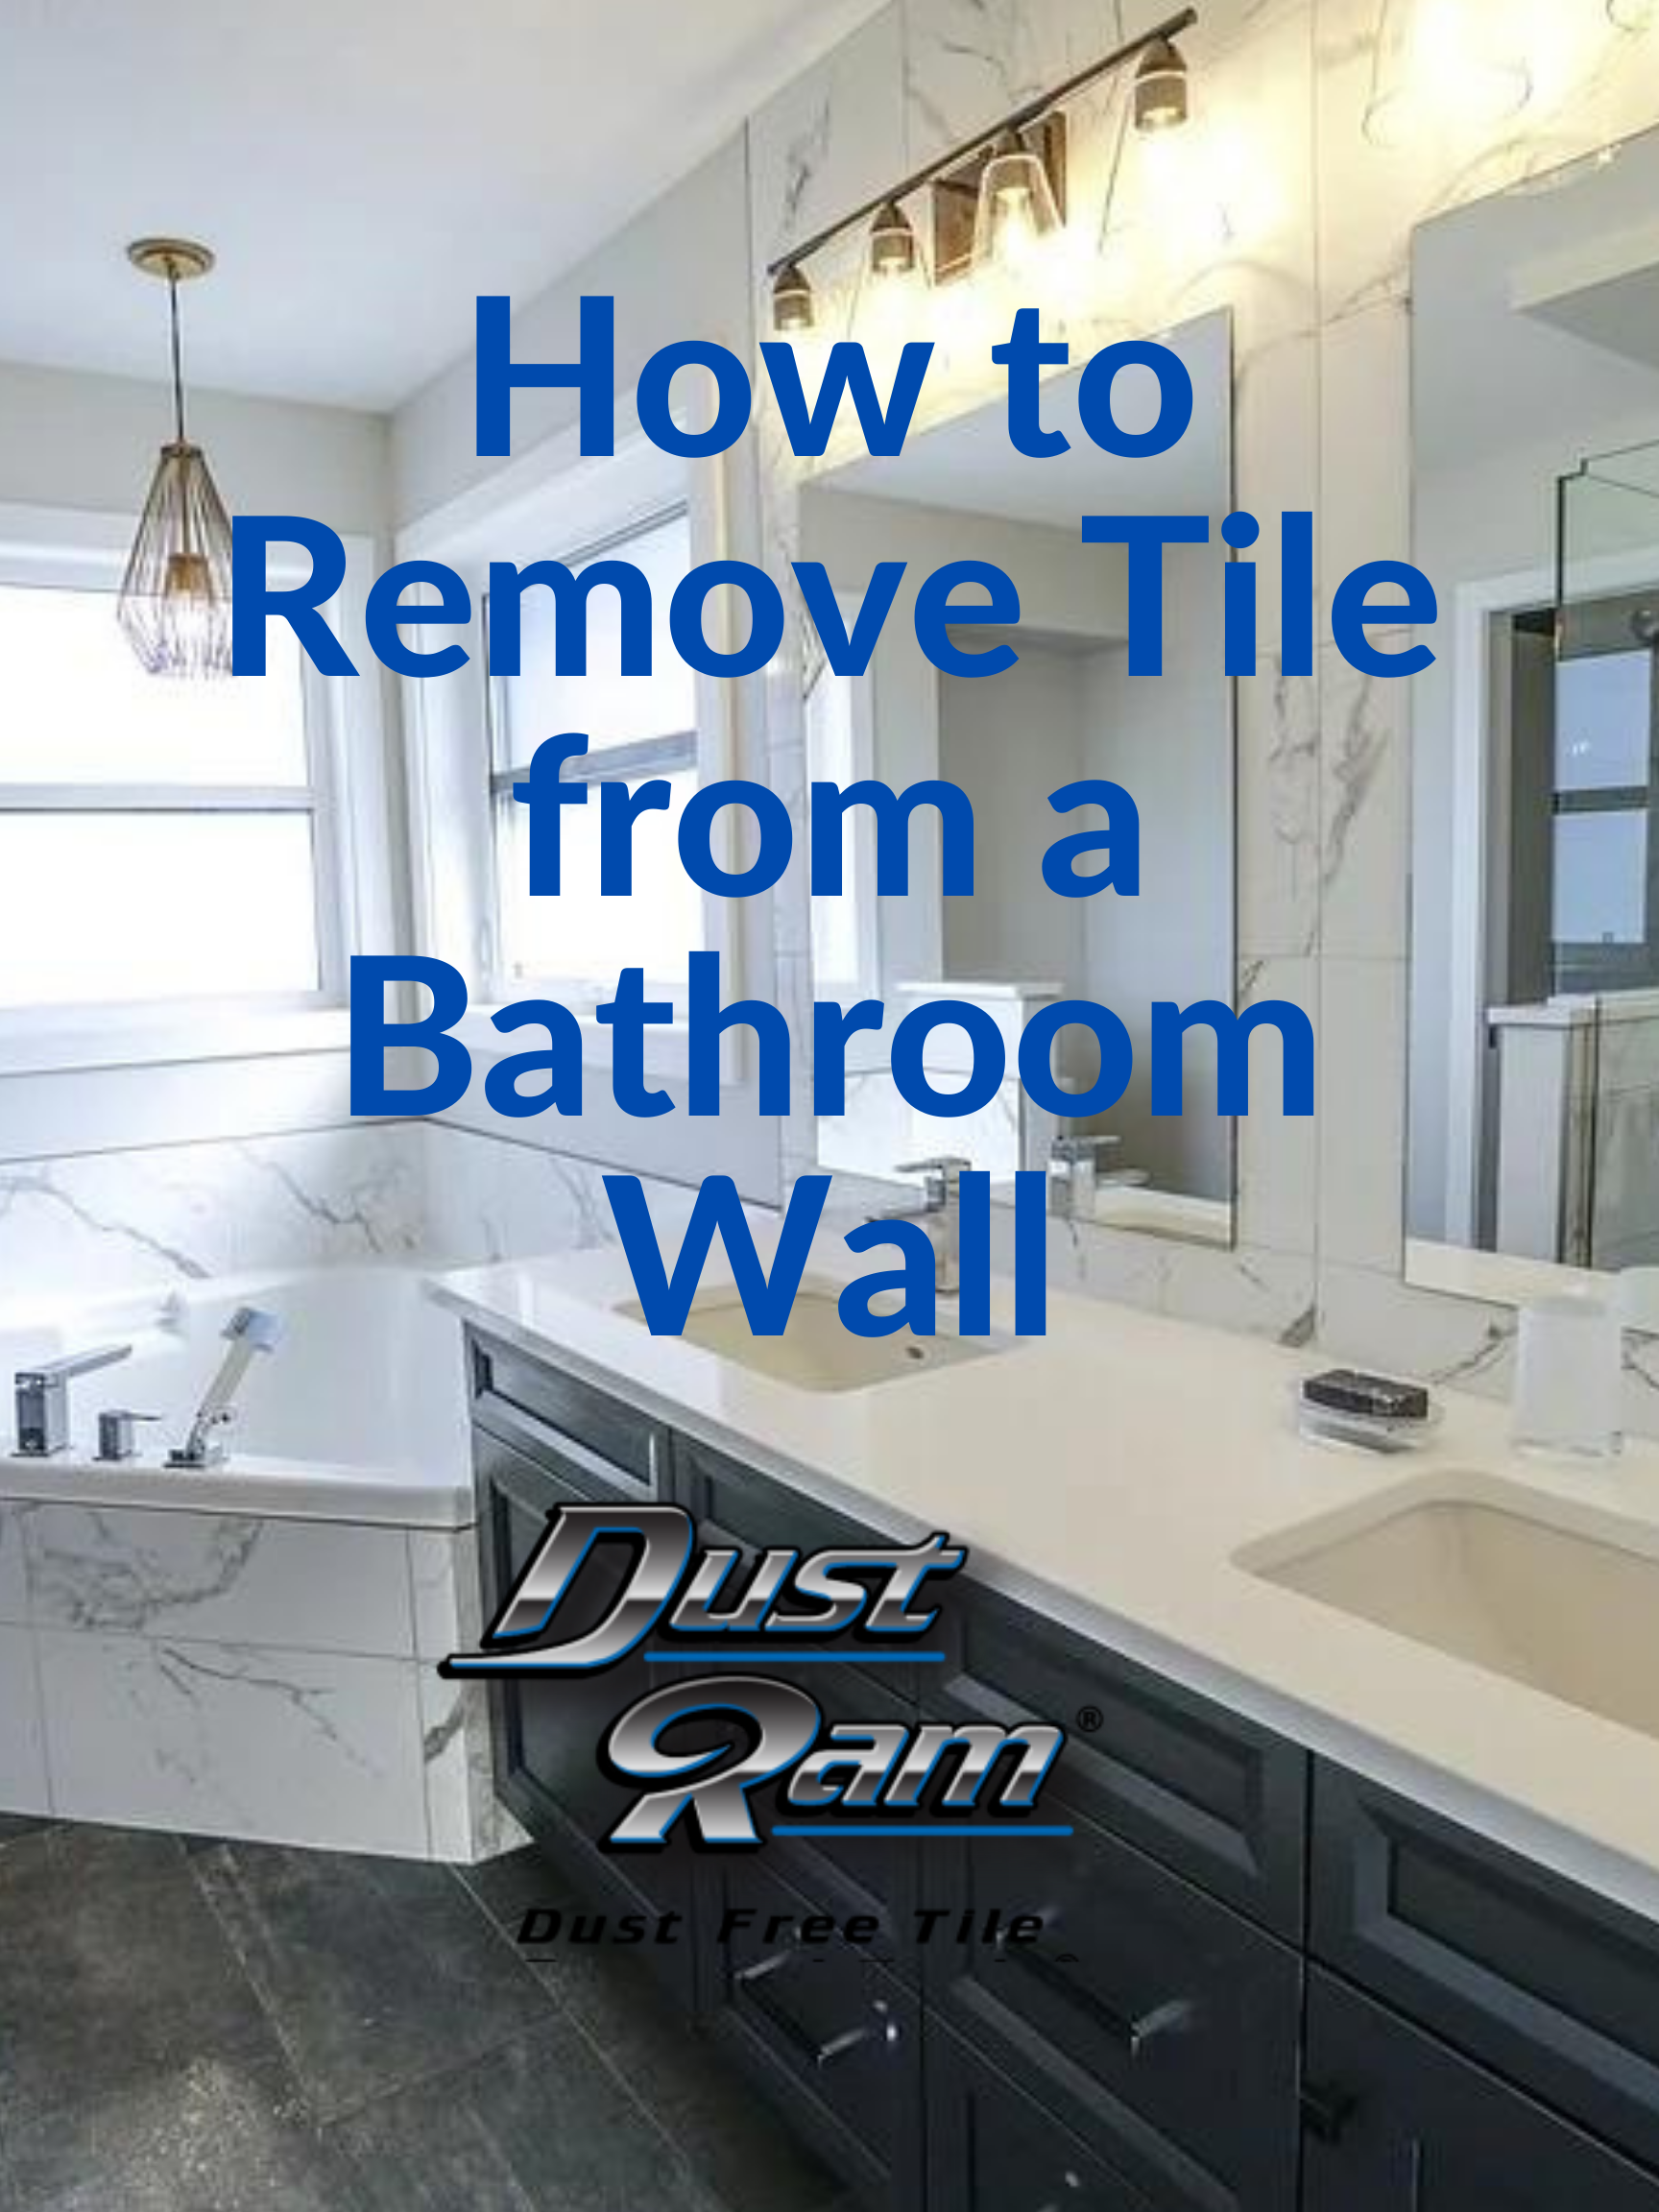 How To Remove Tile From A Bathroom Wall Dustram - How To Remove Tiles From Bathroom Walls